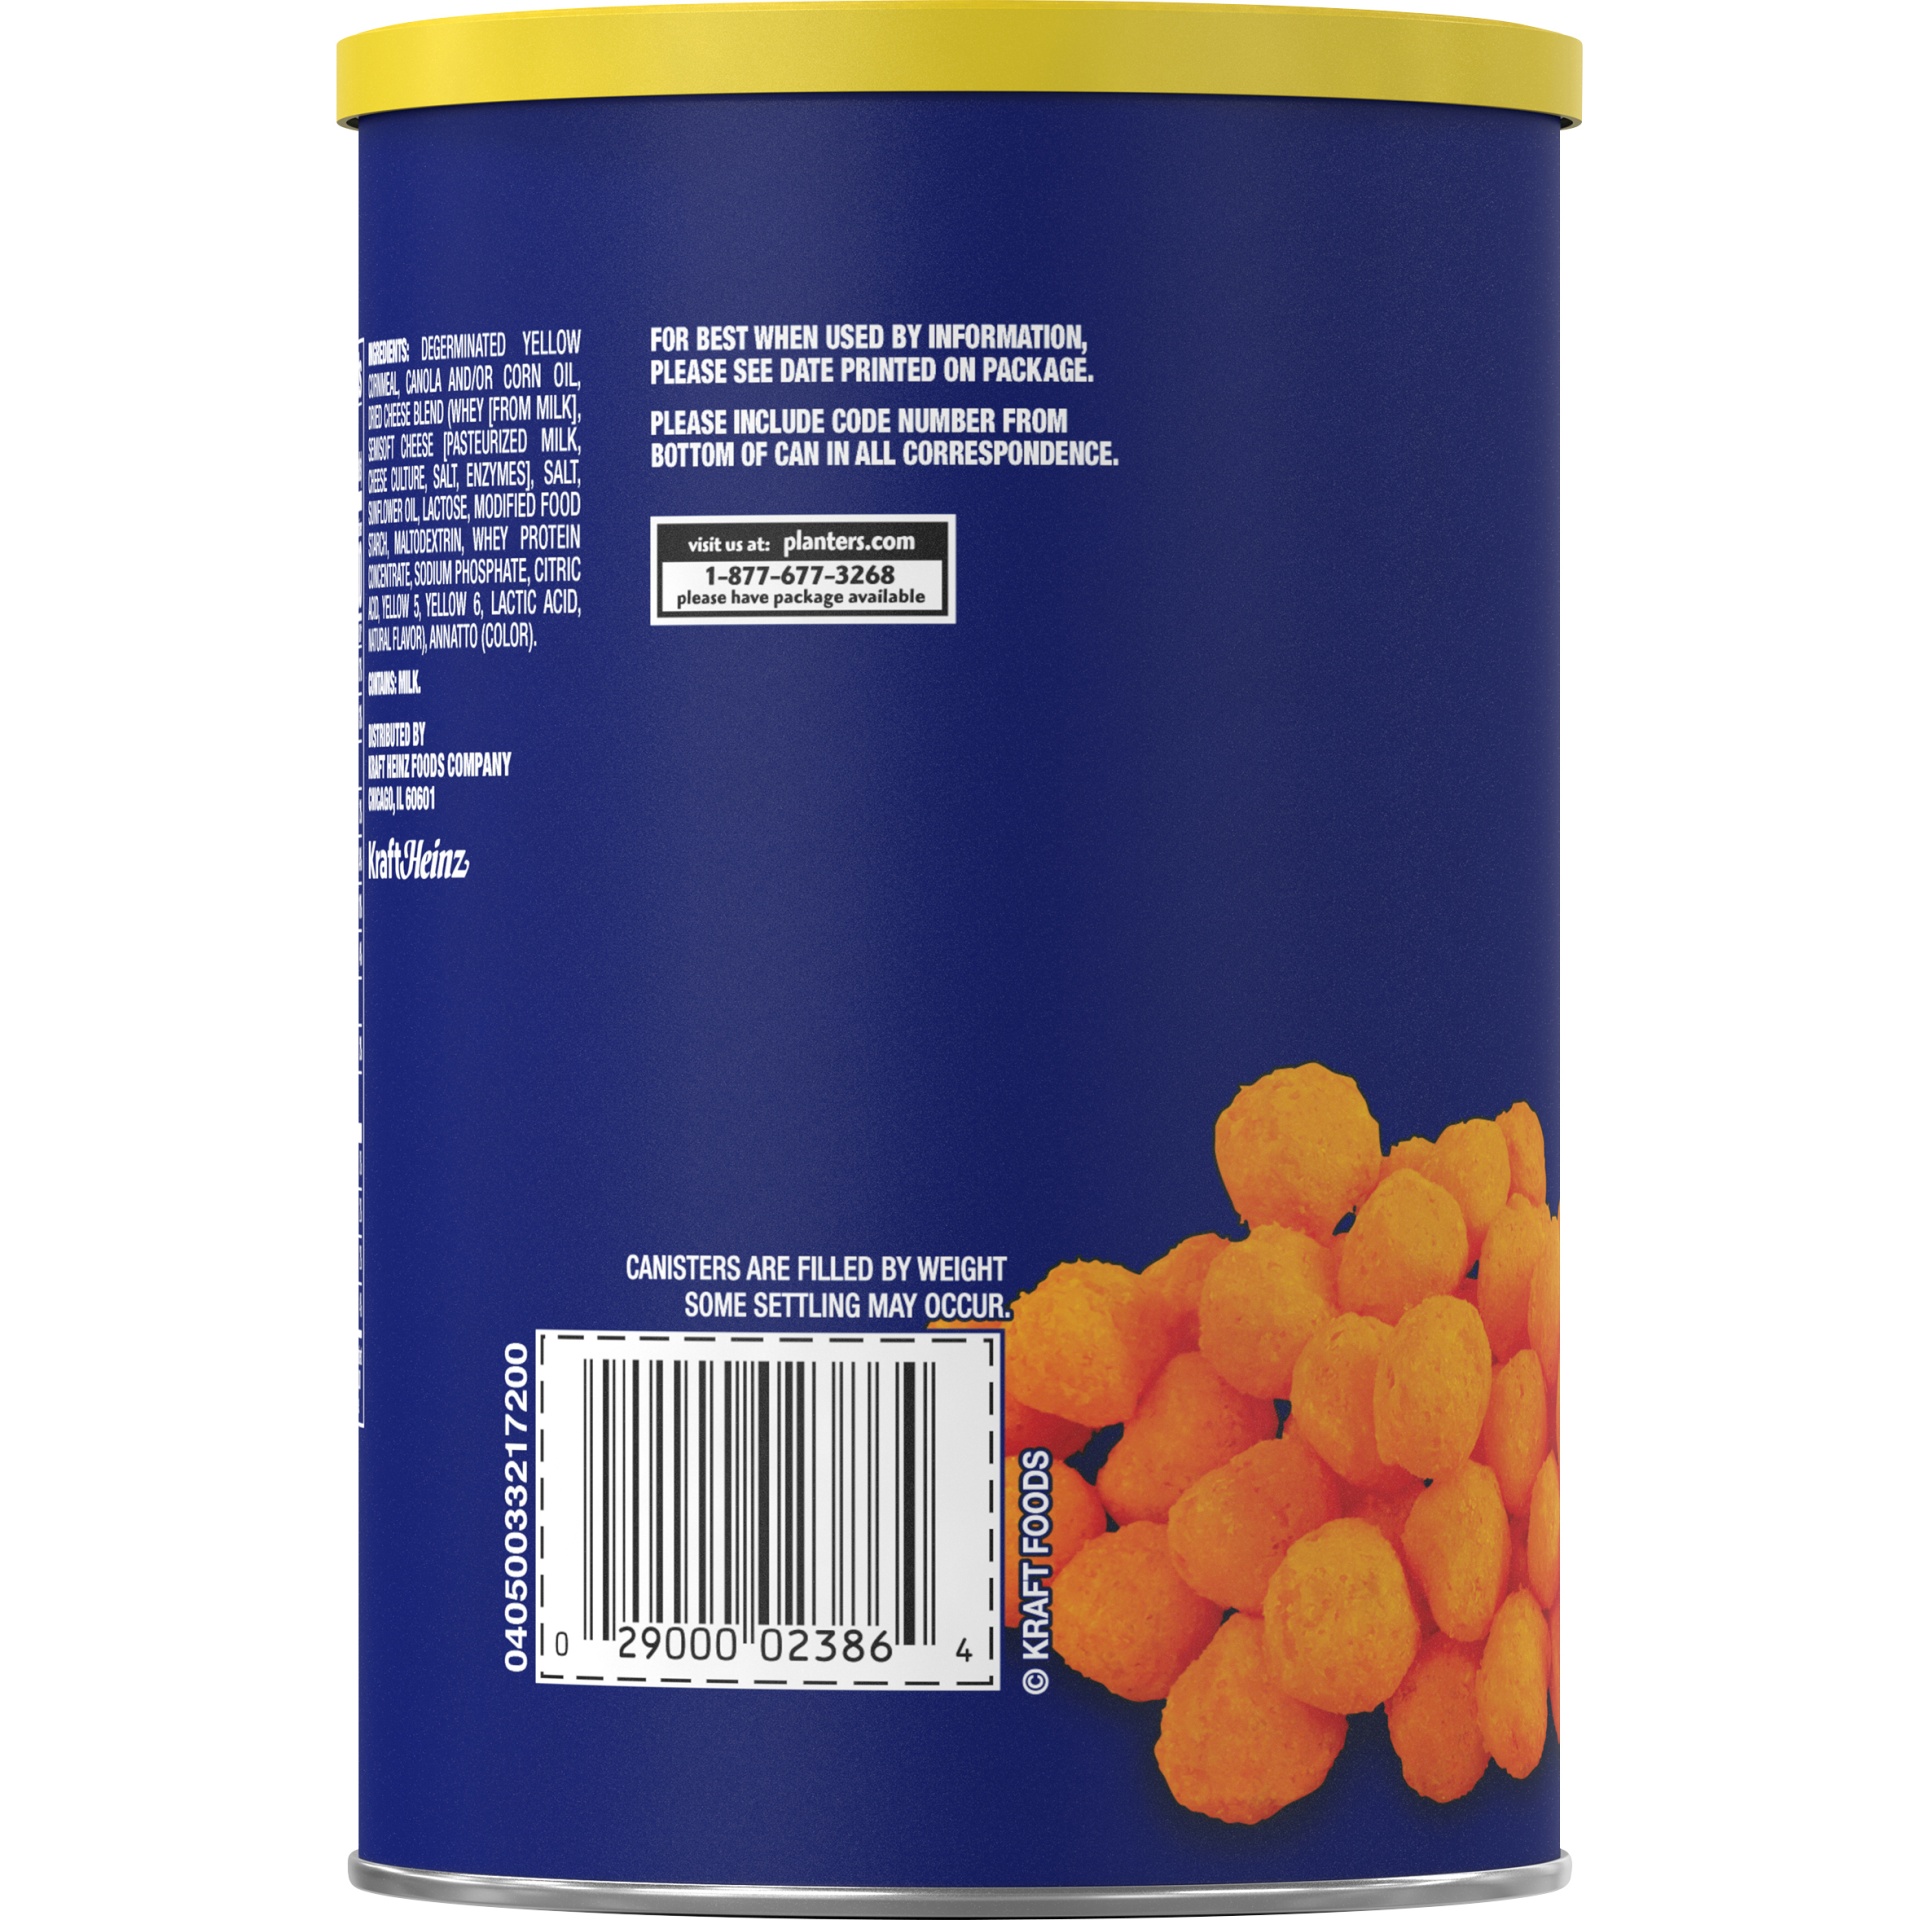 slide 6 of 14, Planters Cheez Balls Puffed Snack, 2.75 oz